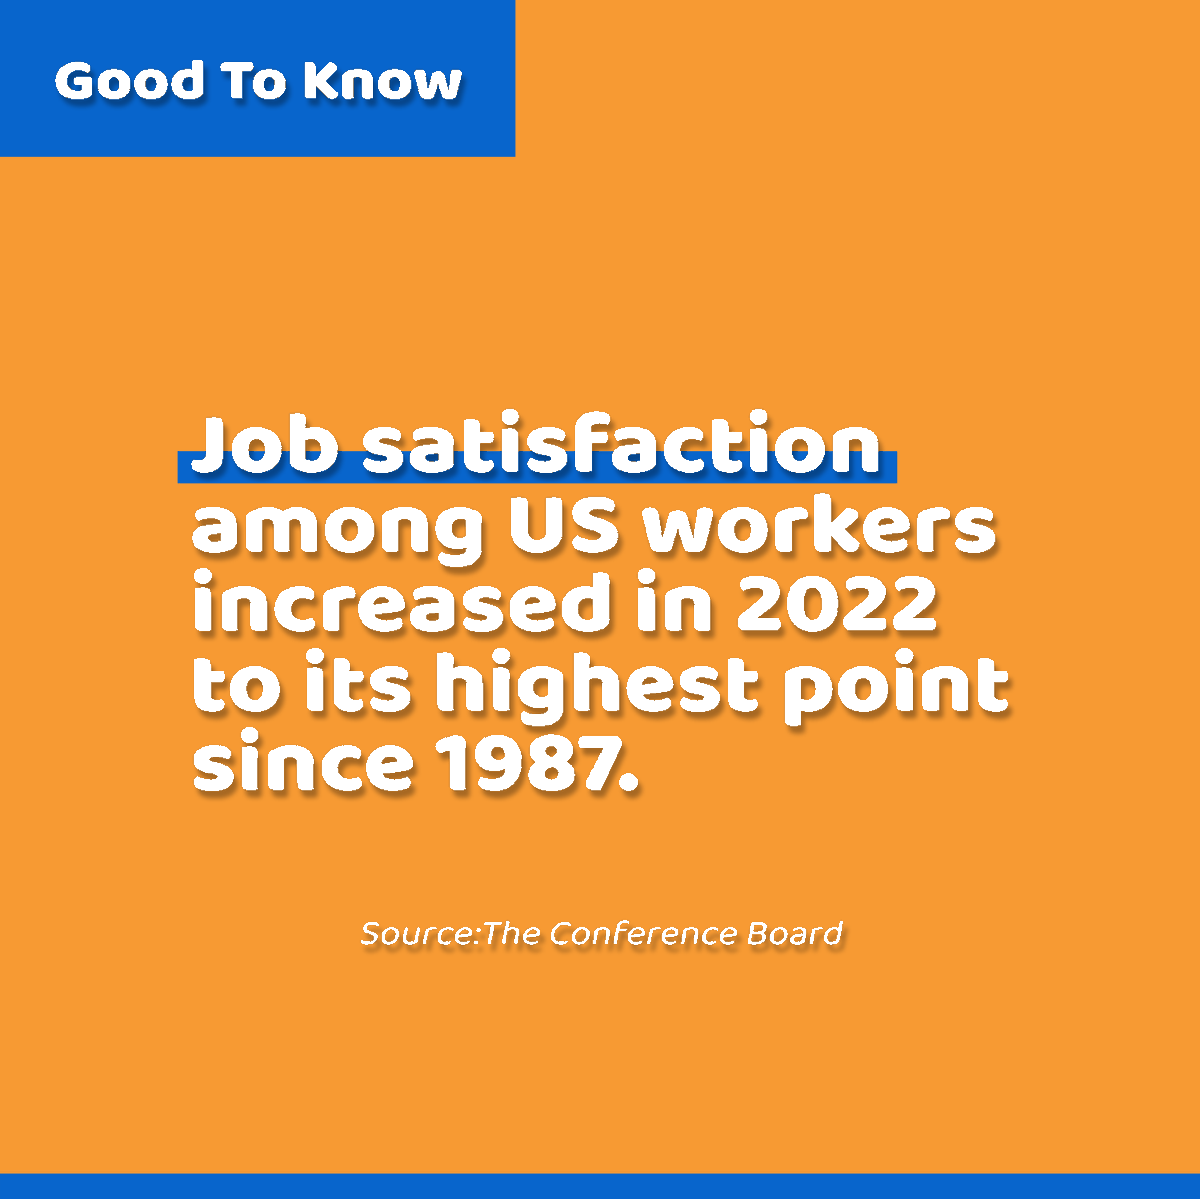 Overall job satisfaction among US workers increased in 2022 to its highest point since The Conference Board began surveying US worker satisfaction in 1987. 

#goodnews #goodbites